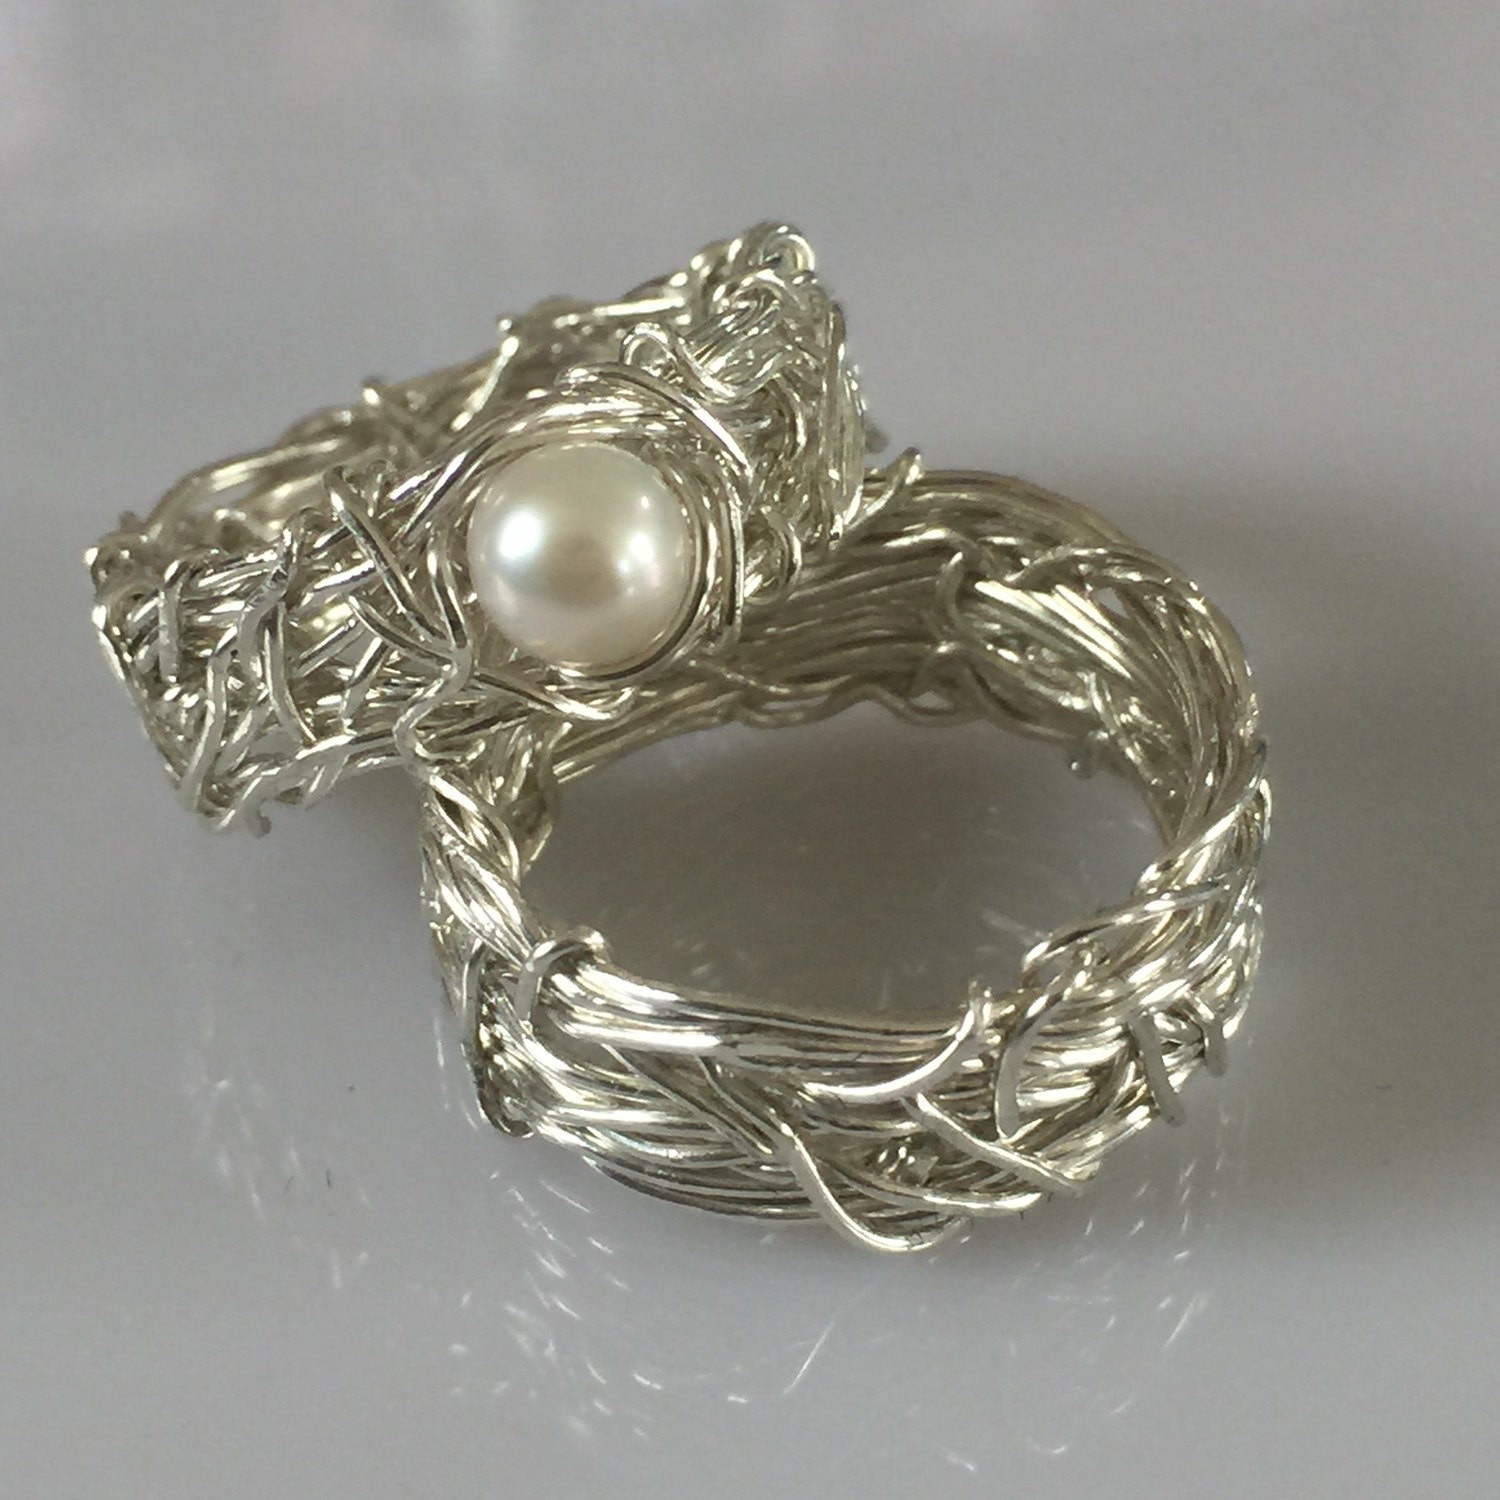 Pearl Wedding Ring Sets
 His and Hers wedding rings Filigree Wedding Ring Sets Pearl